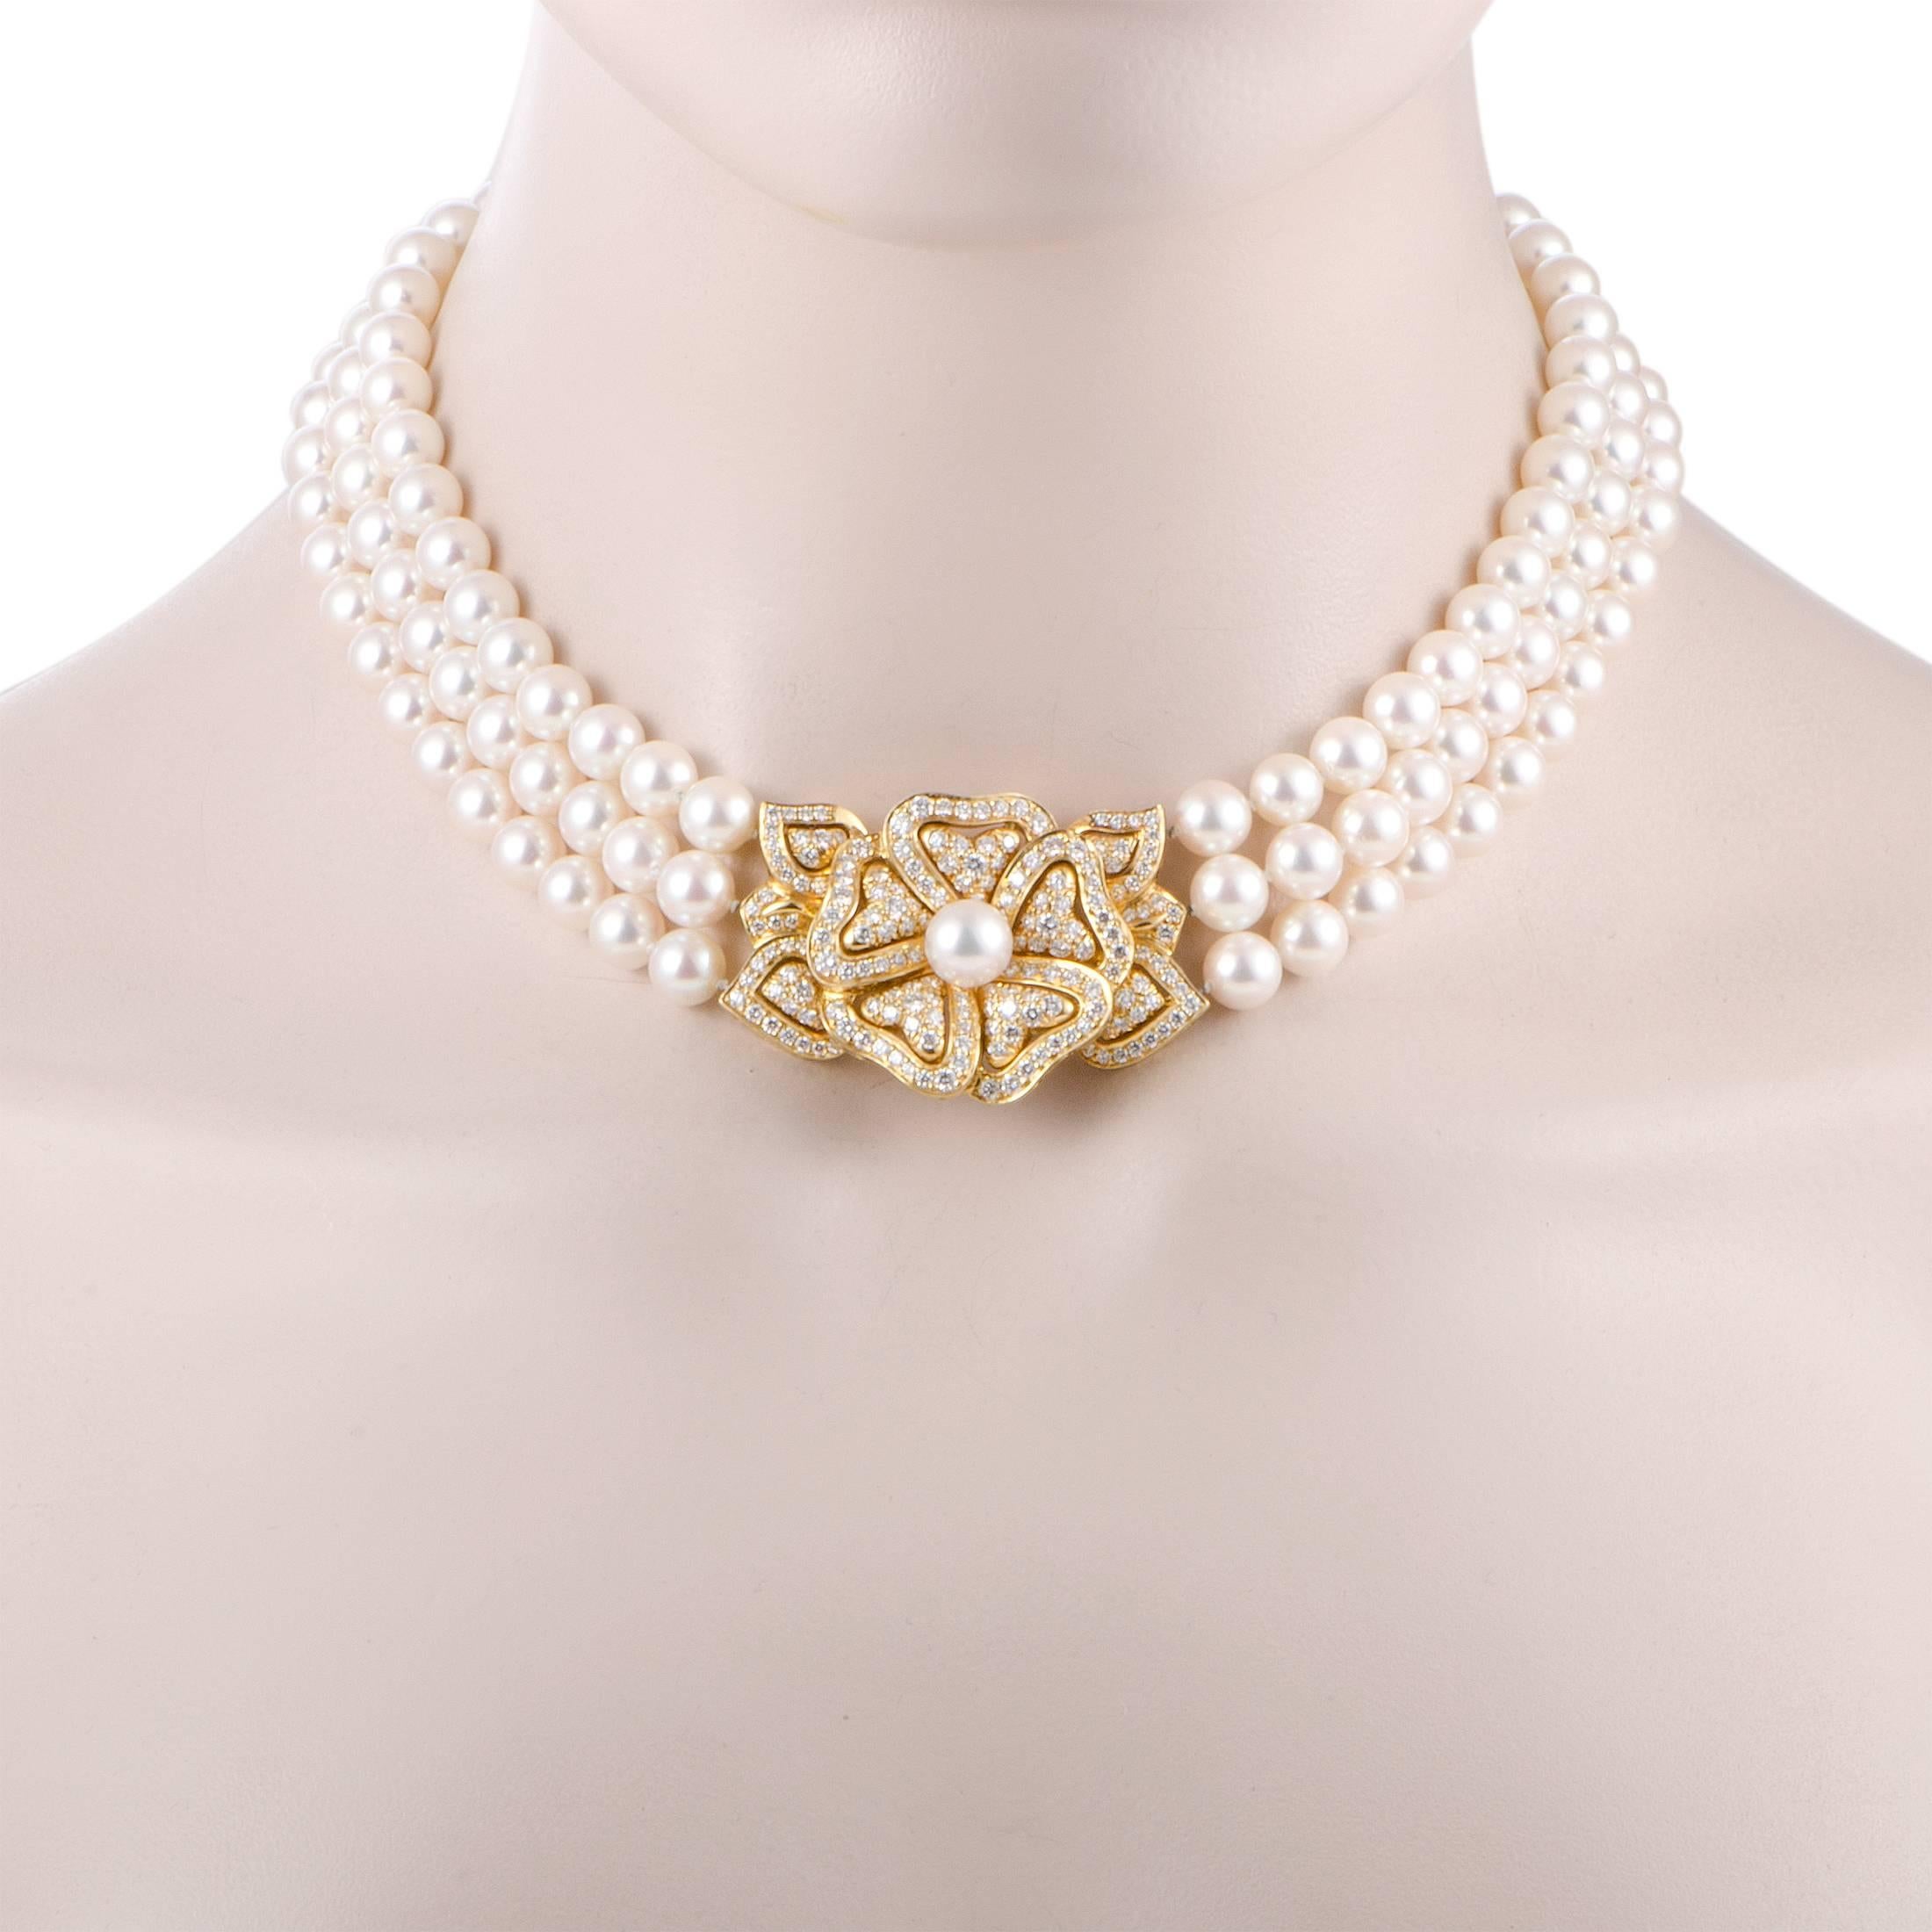 Embodying the very essence of timeless elegance and refined design, this marvelous Mikimoto necklace exudes prestigious opulence and lustrous sophistication. The necklace is made of luxurious 18K yellow gold and boasts sublime pearls and